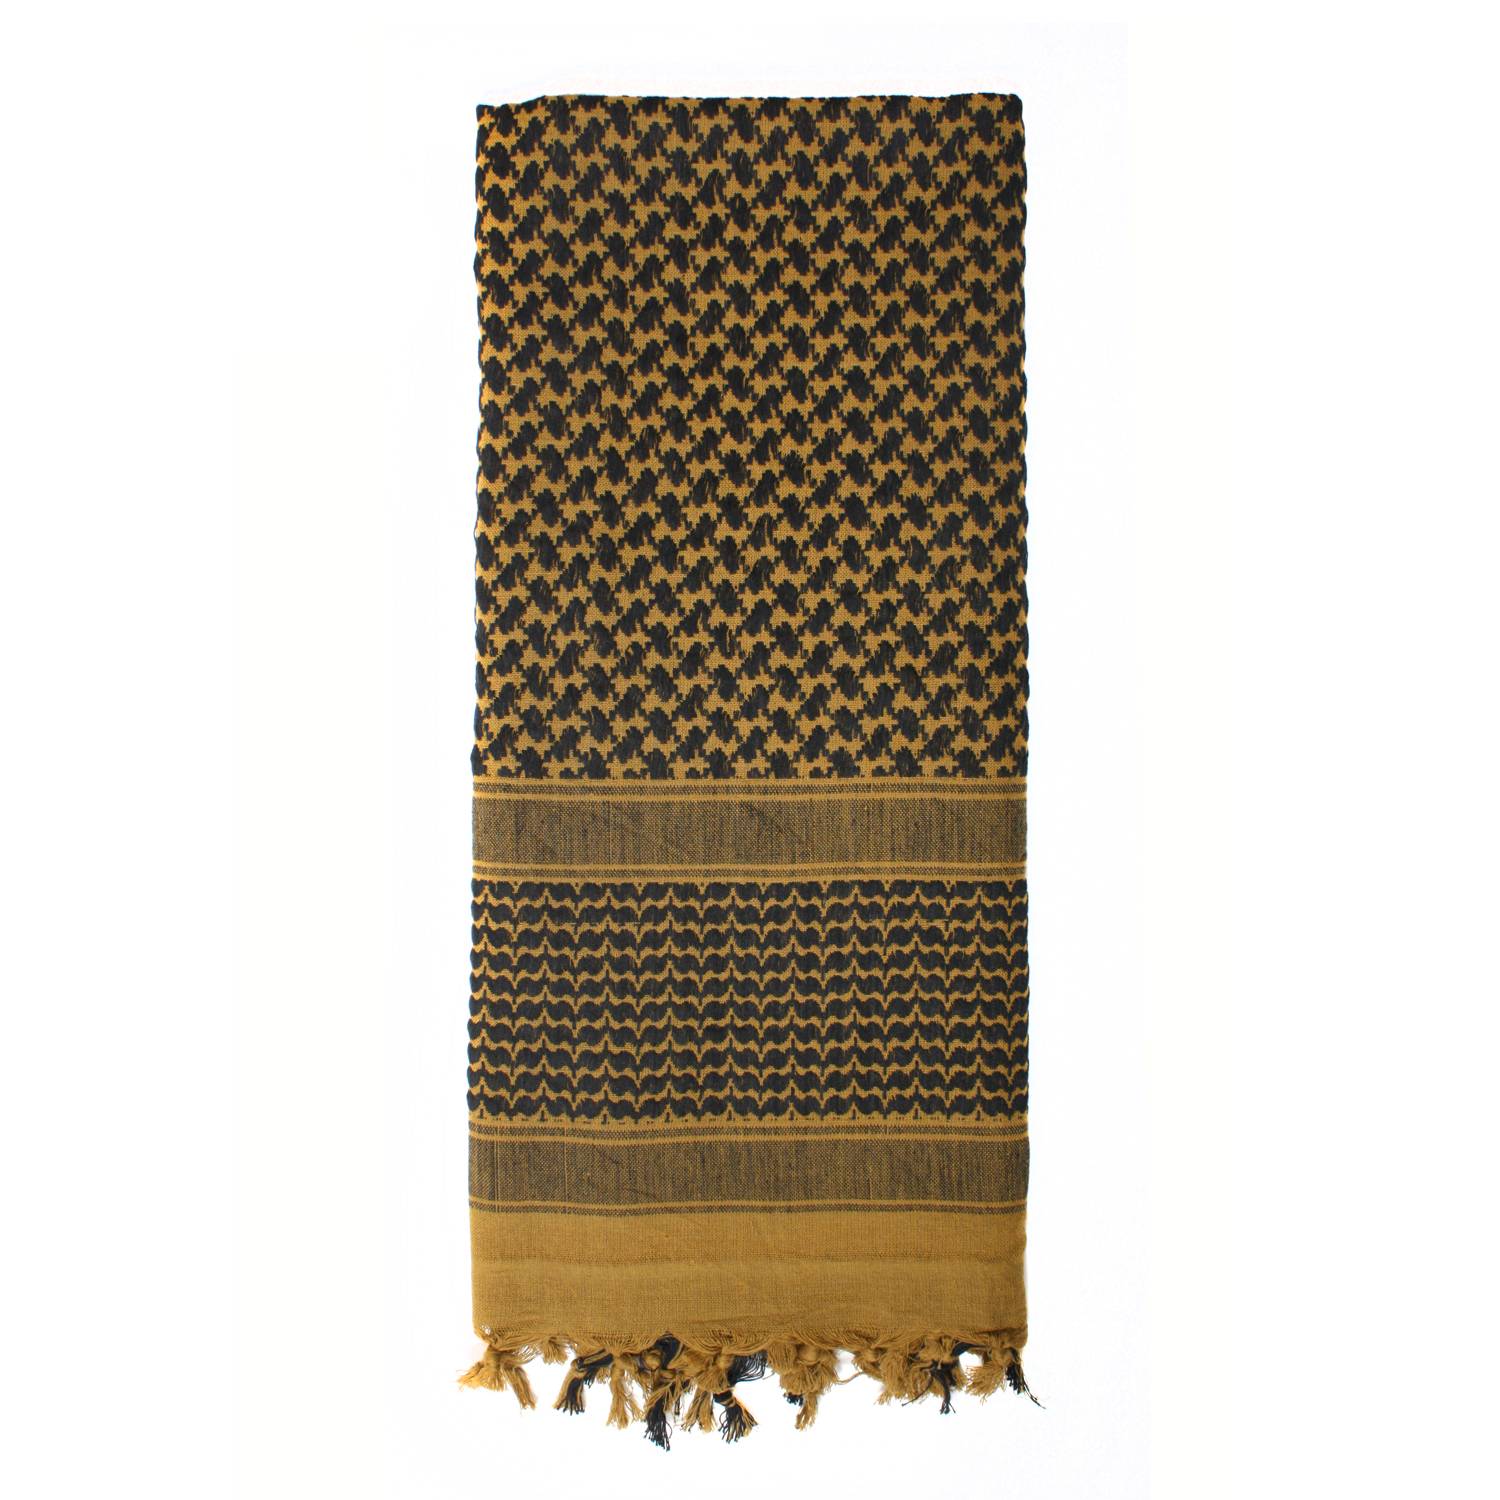 ROTHCO LIGHTWEIGHT SHEMAGH TACTICAL DESERT SCARVES